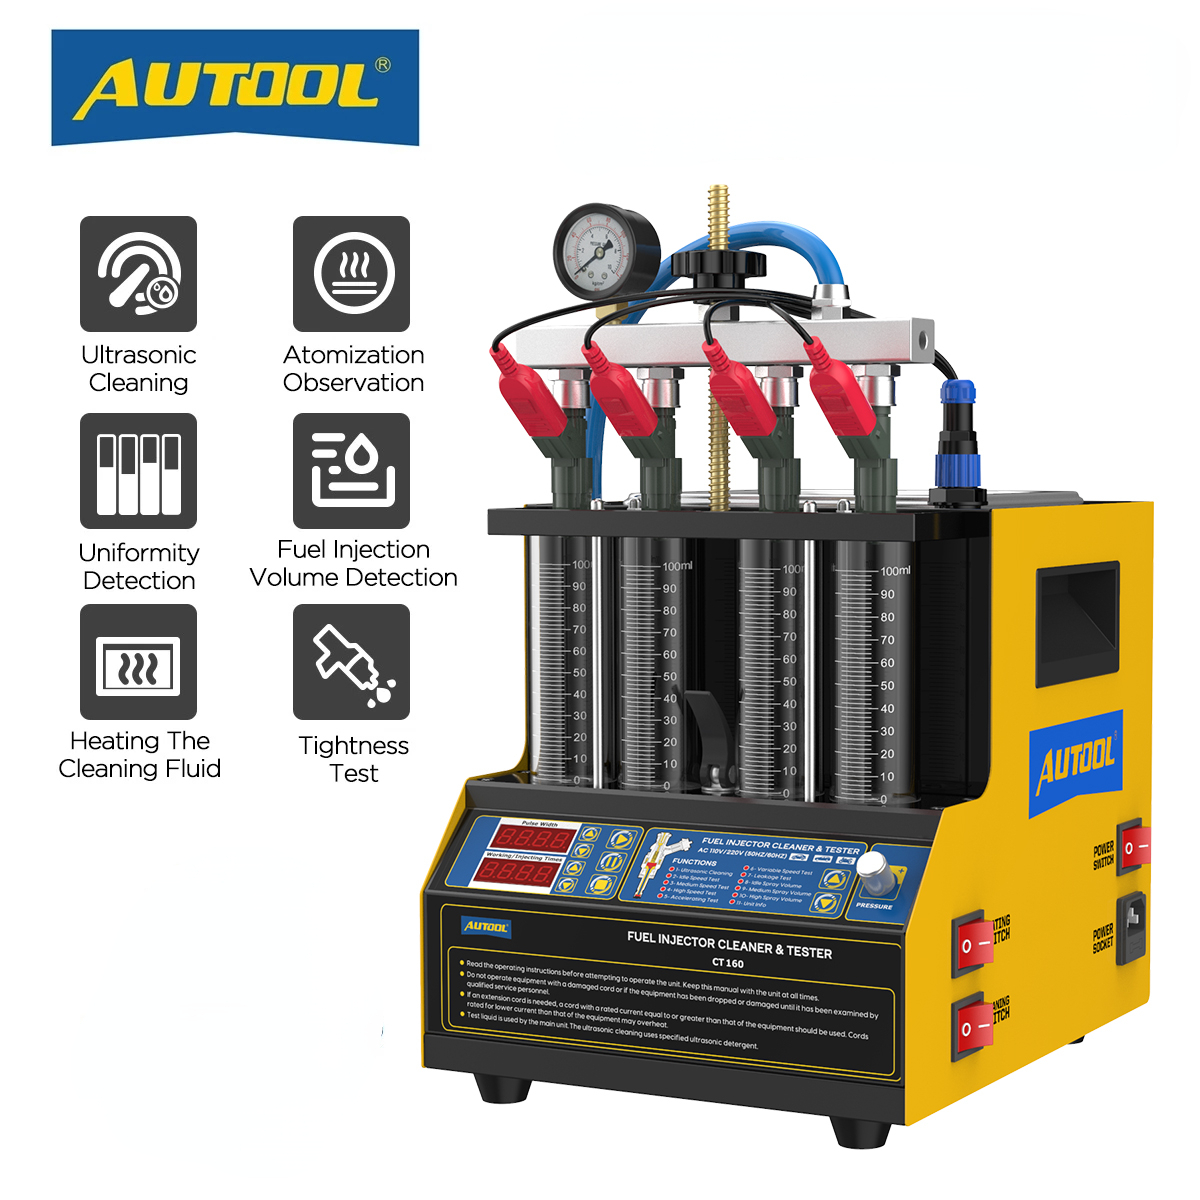 AUTOOL CT160 Fuel Injector Heating Cleaning & Tester Machine Car & Motorcycle 4-Cylinders Ultrasonic Cleaner for GDI 110V 220V